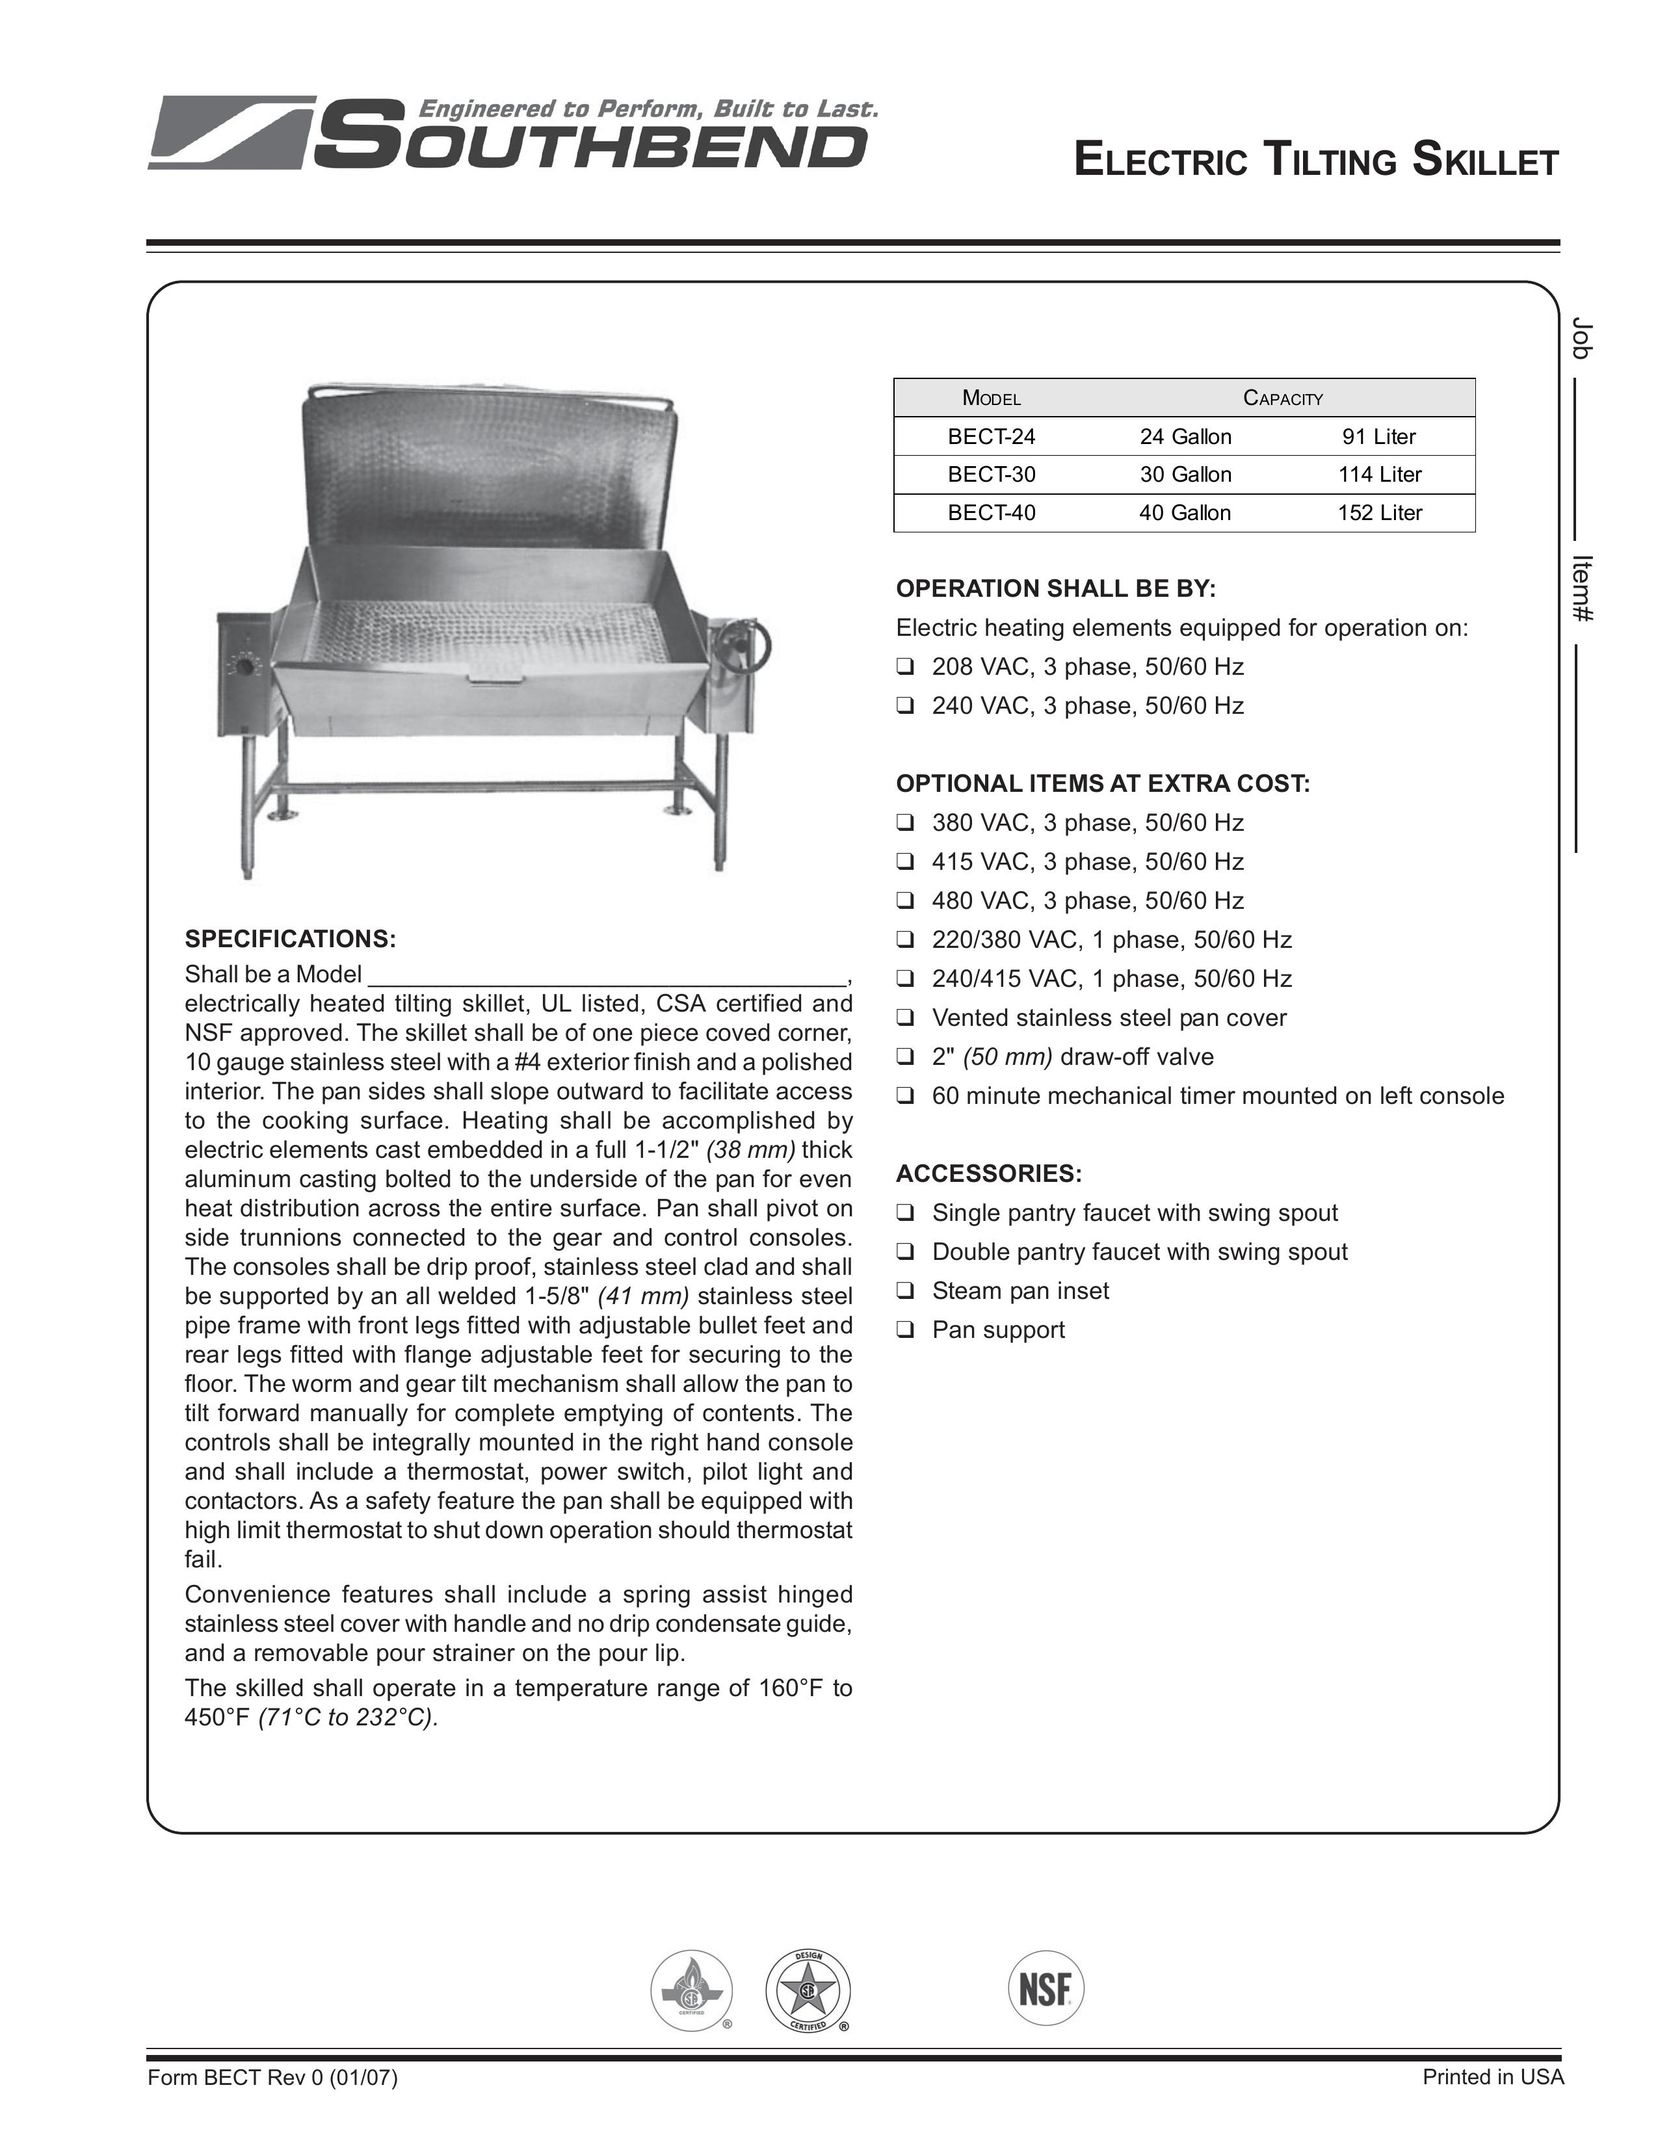 Southbend BECT-24 Fryer User Manual